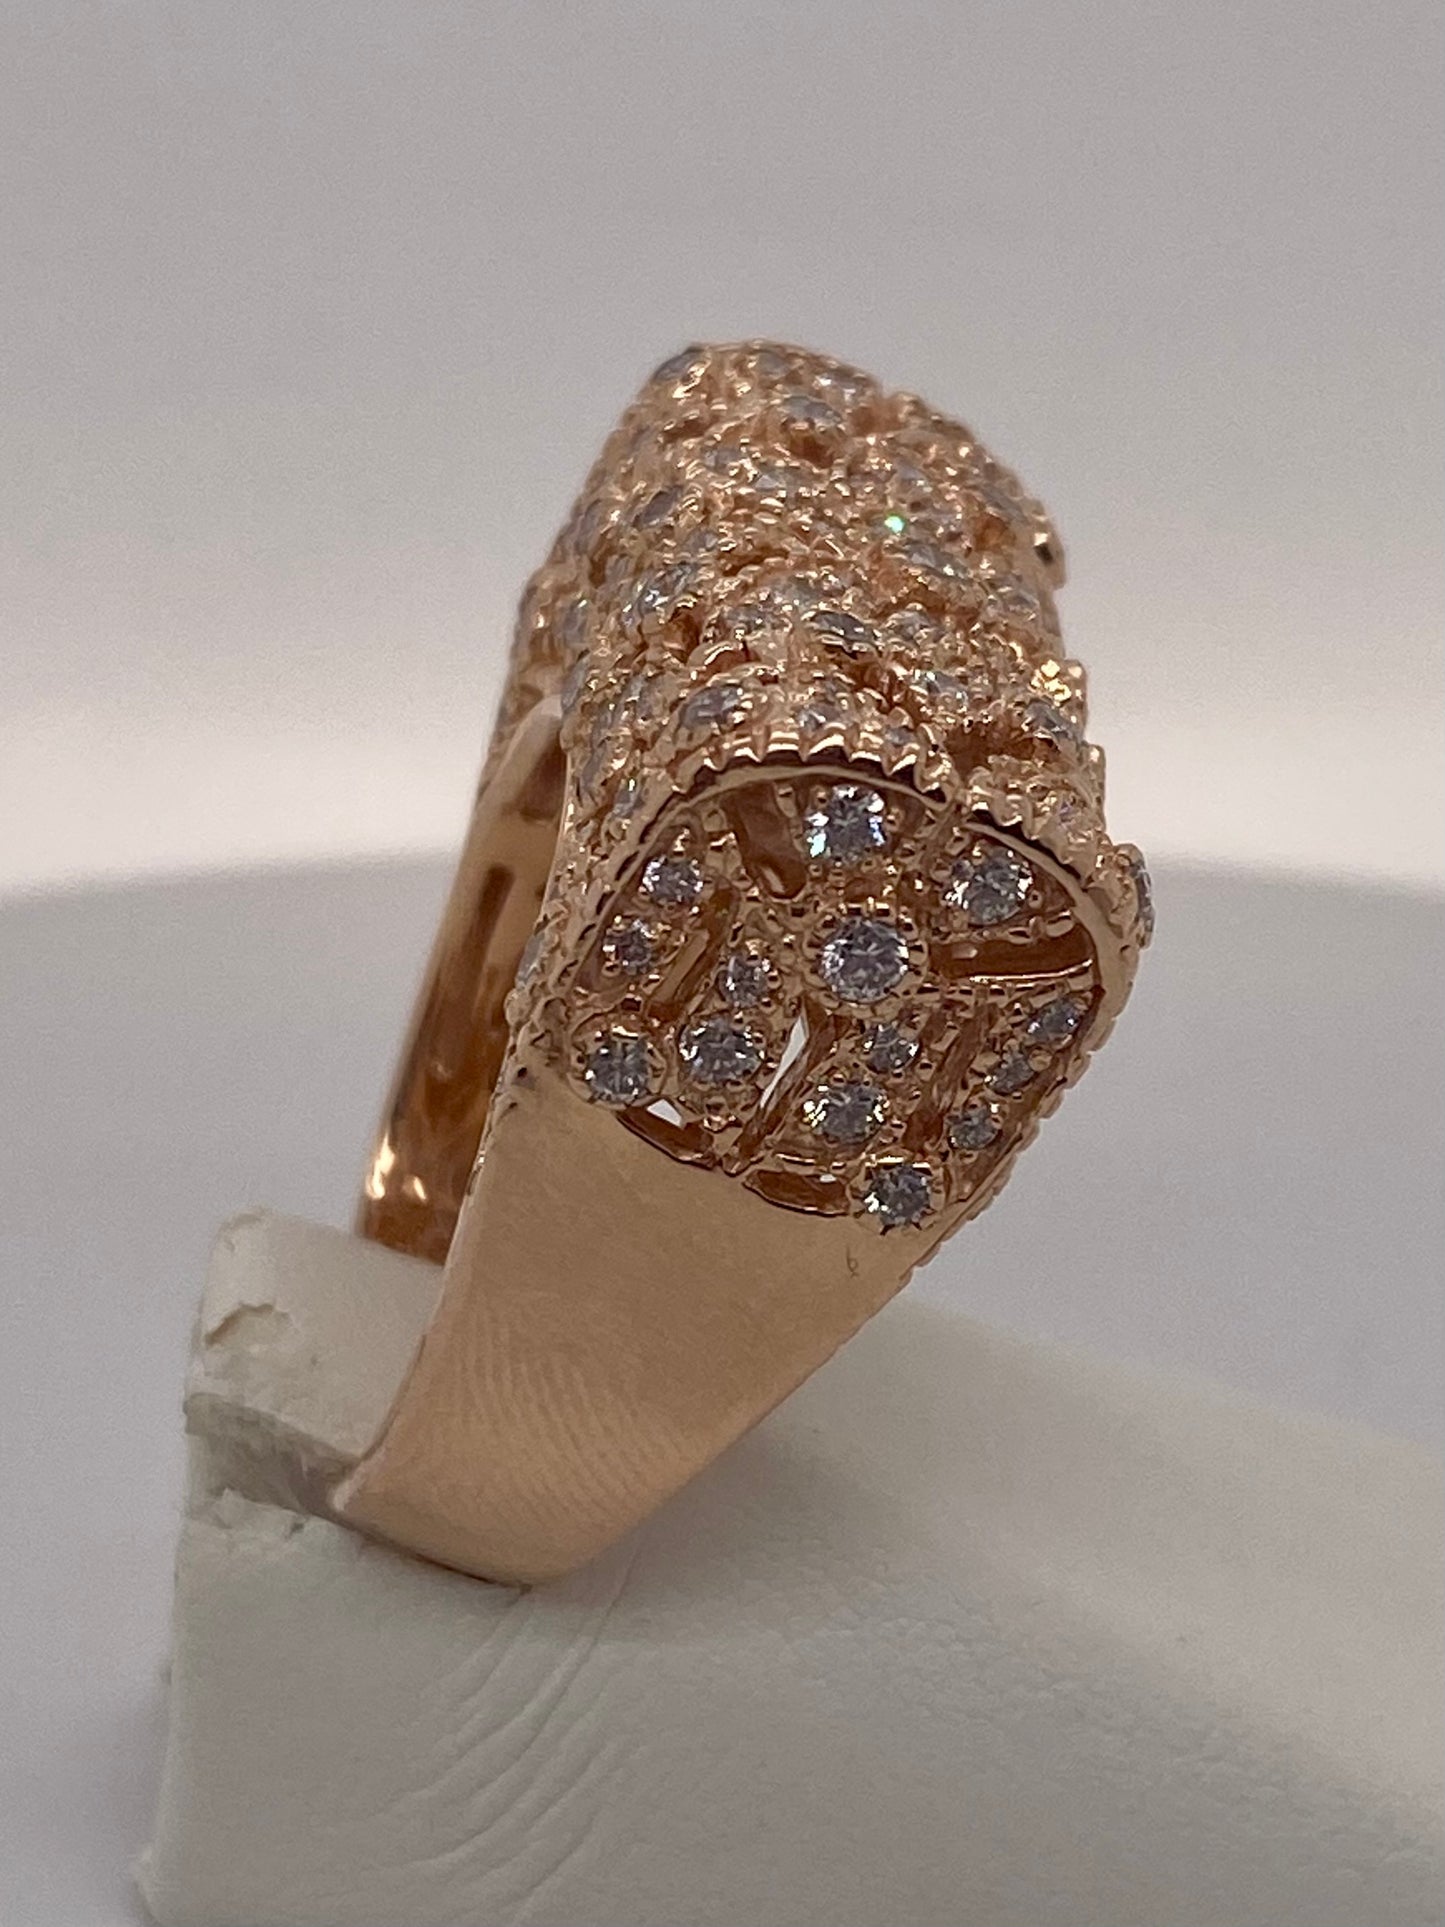 Rose Gold and Diamond Fashion Ring